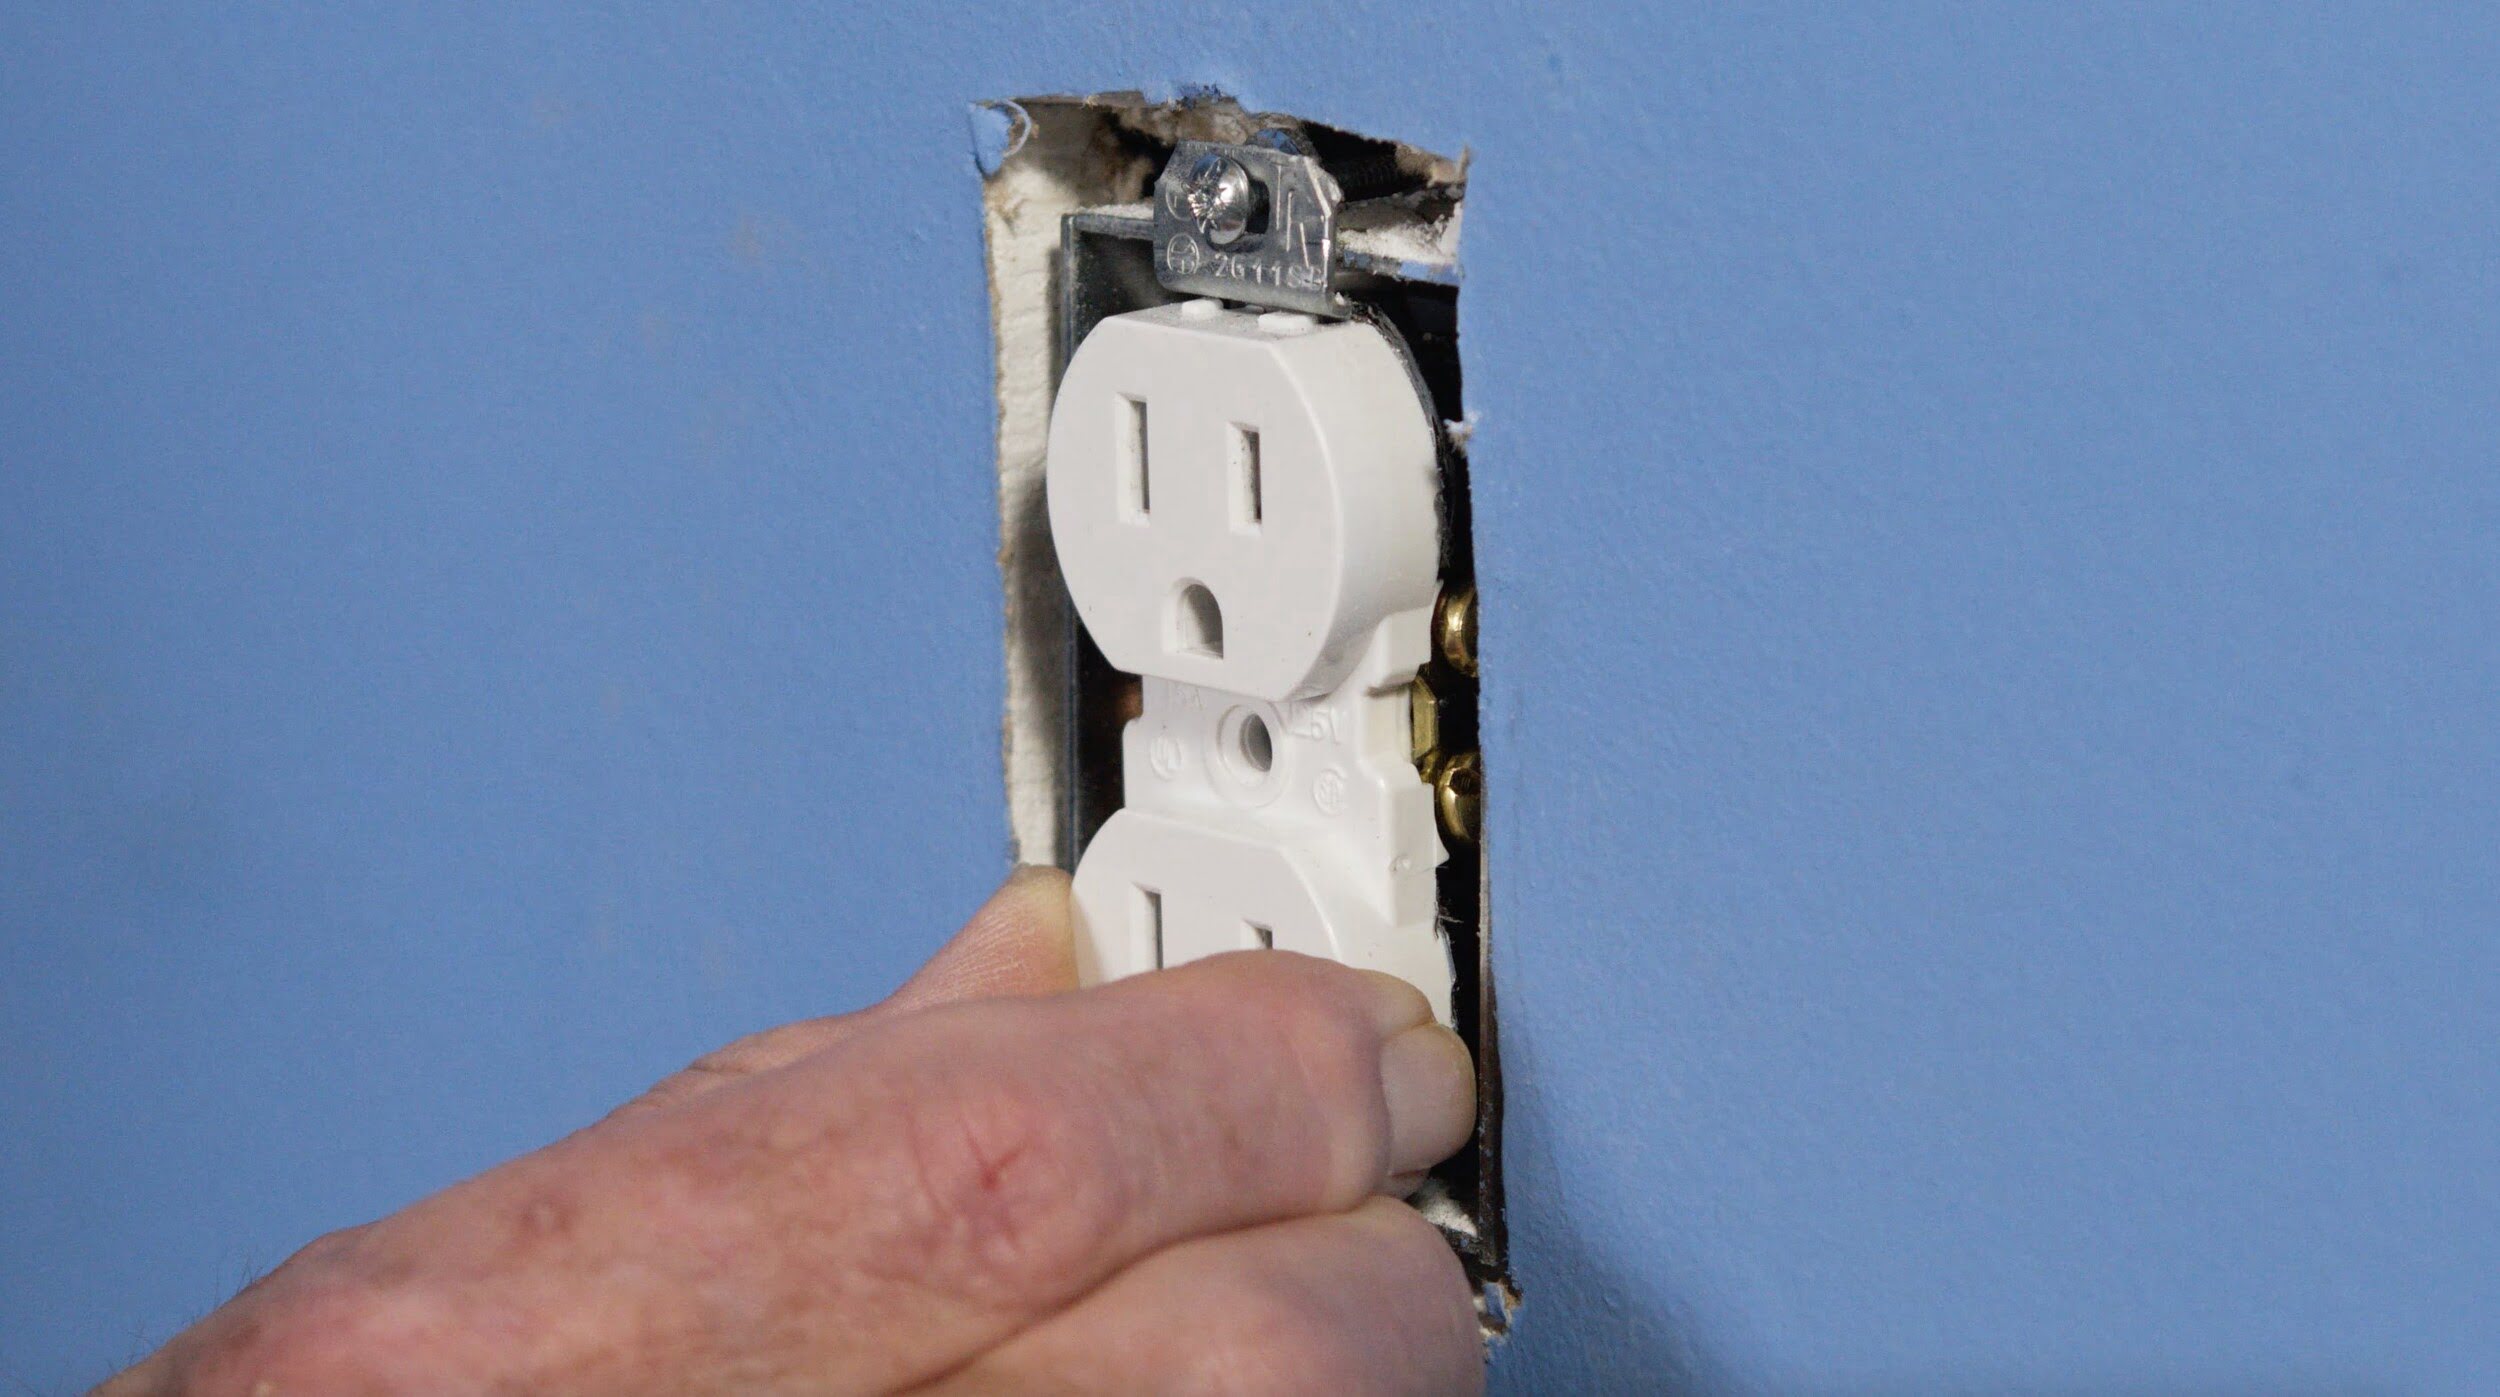 How To Fix Loose Electrical Box